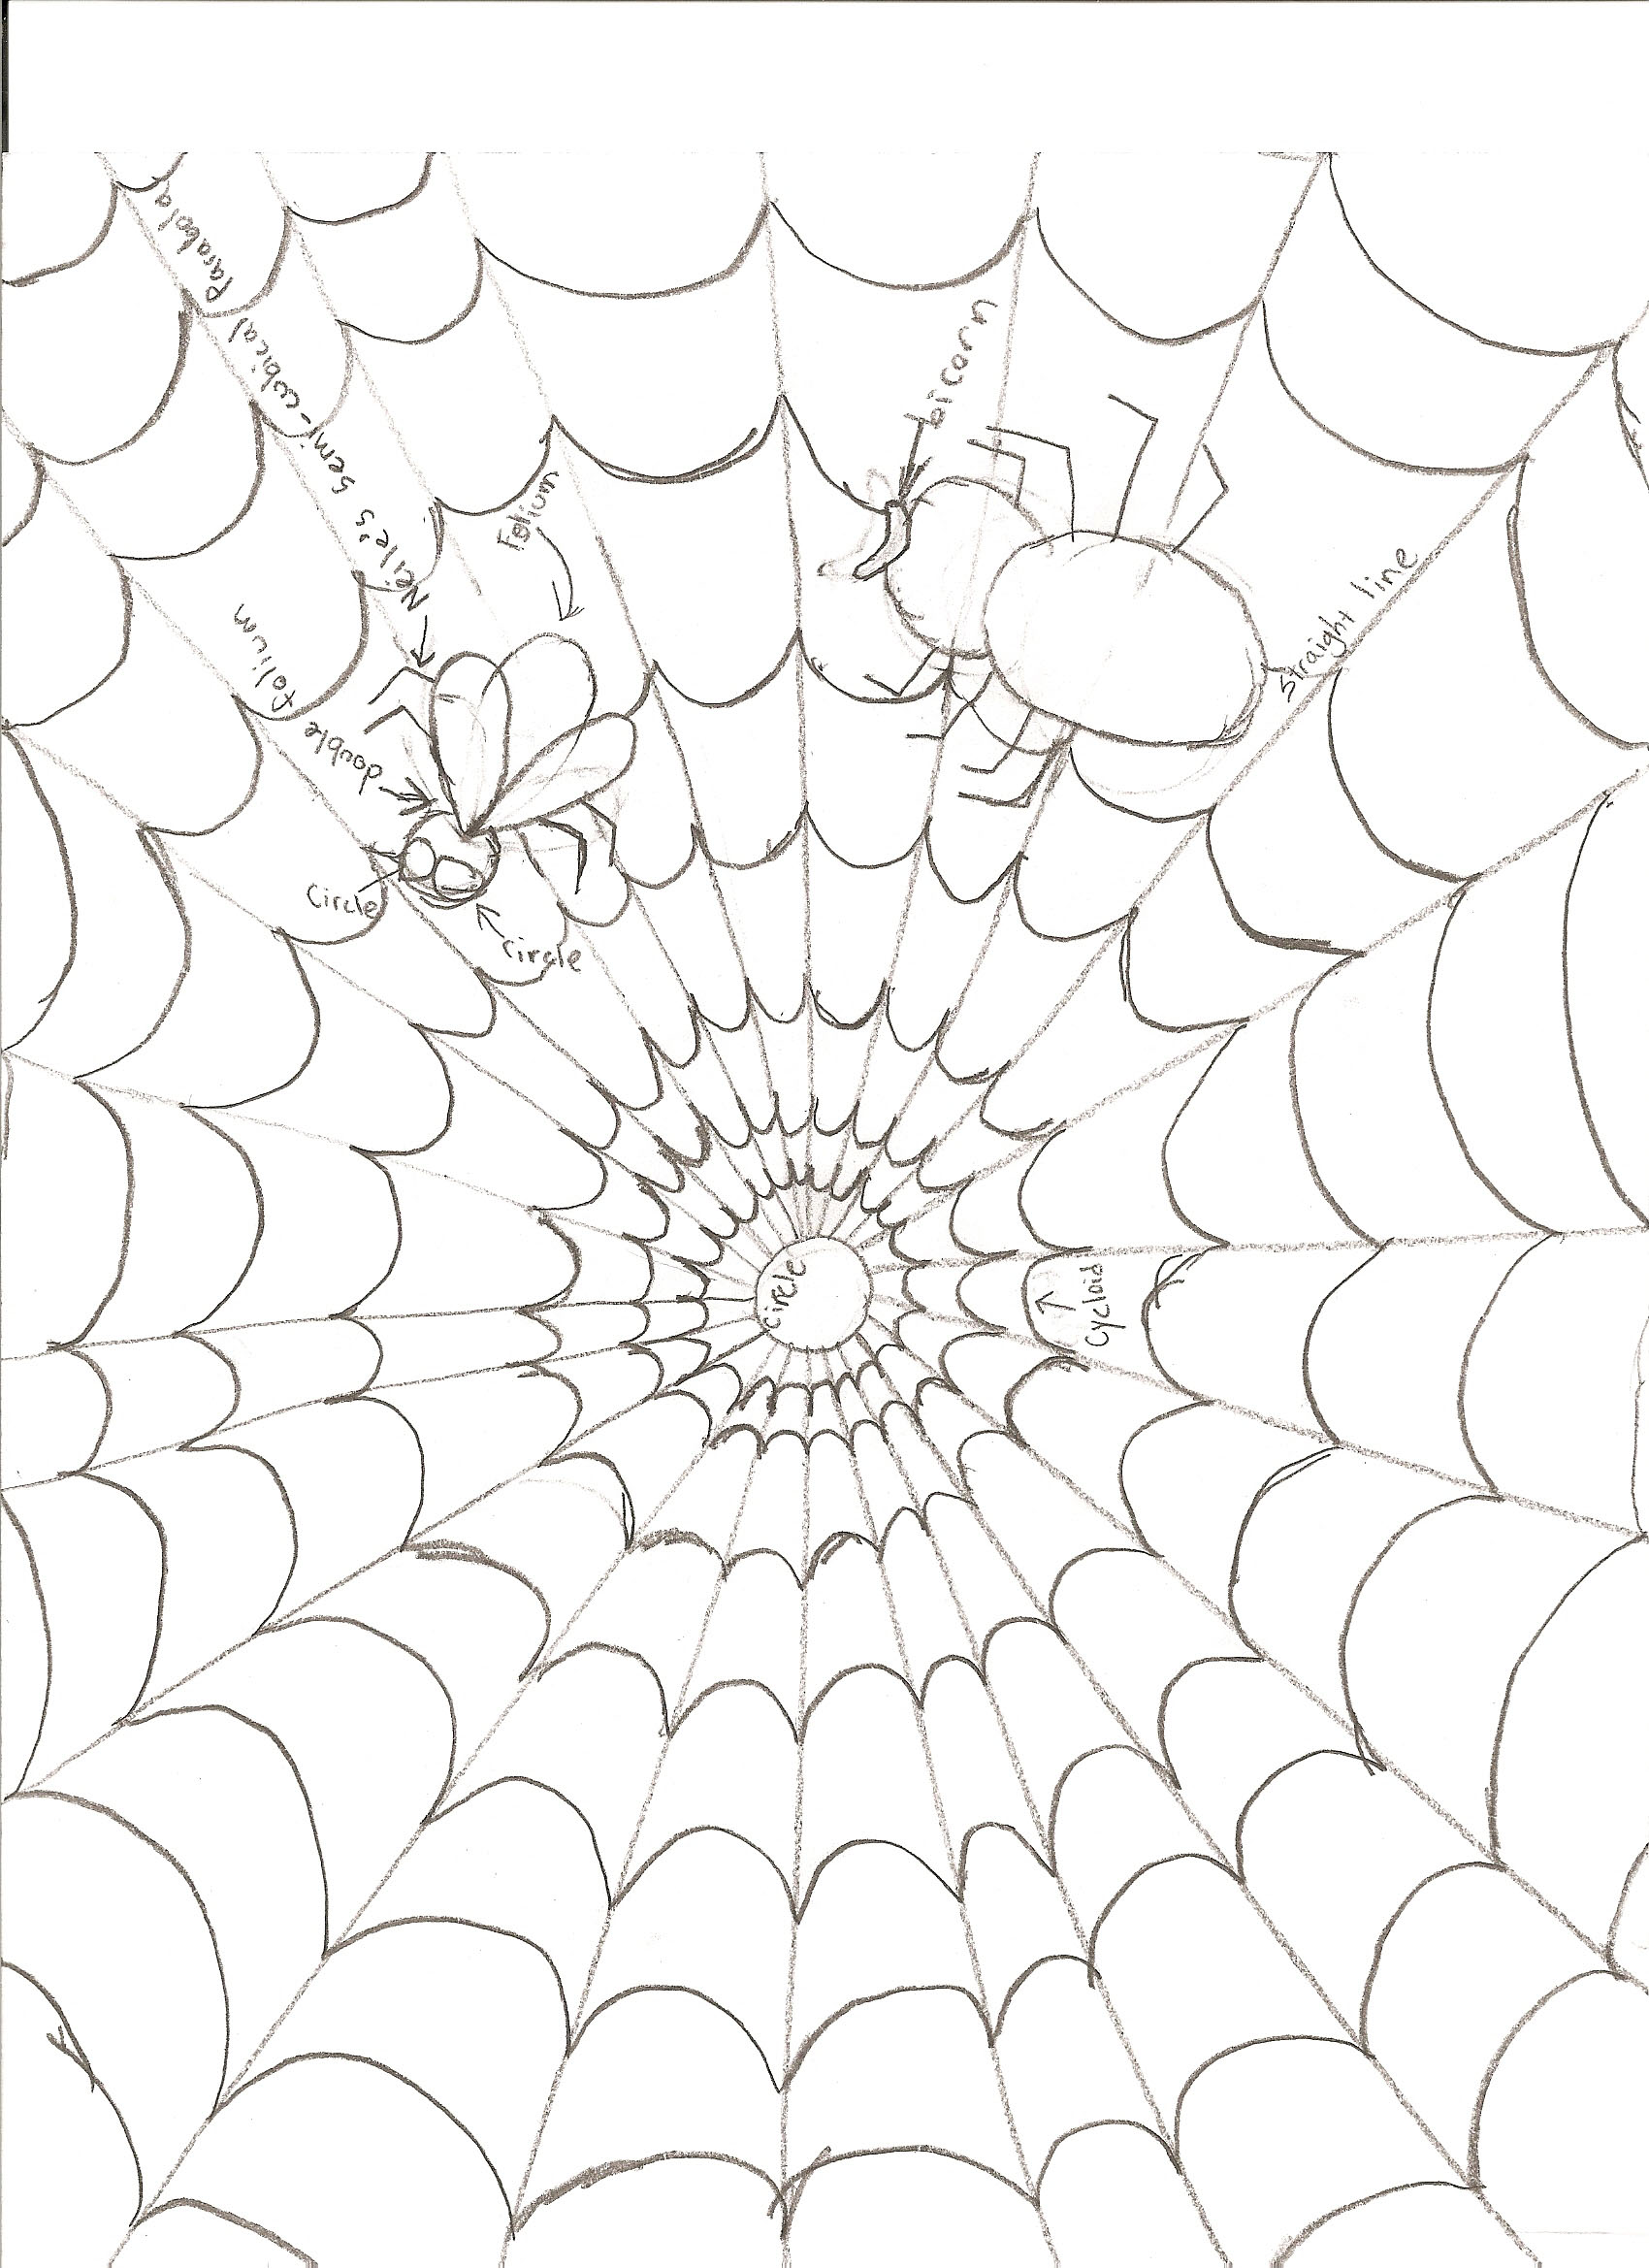 Spider Web Line Drawing at GetDrawings.com | Free for personal use ...